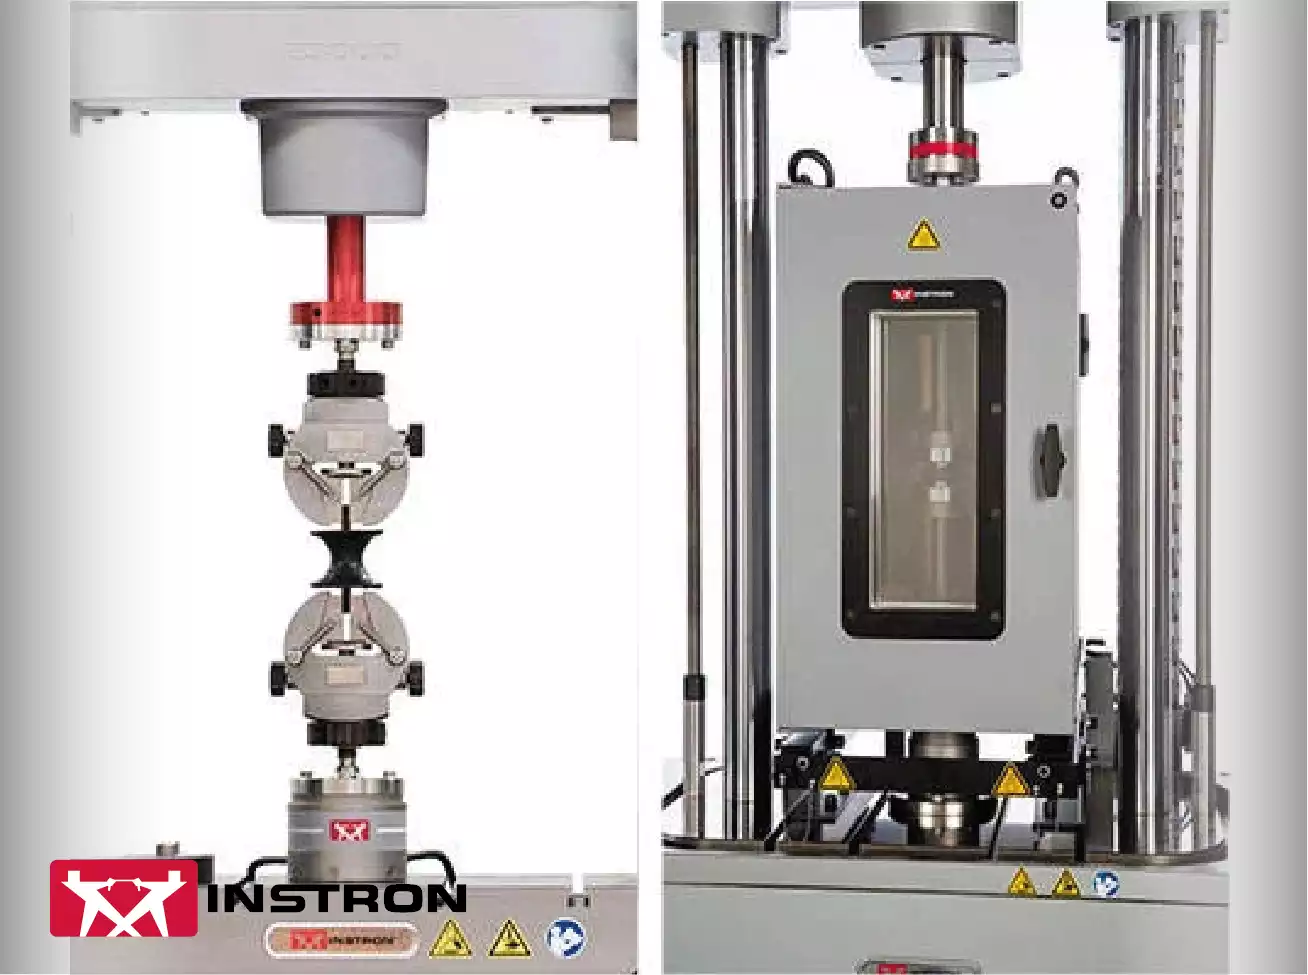 Instron ElectroPuls® All-Electric Dynamic and Fatigue Test Systems